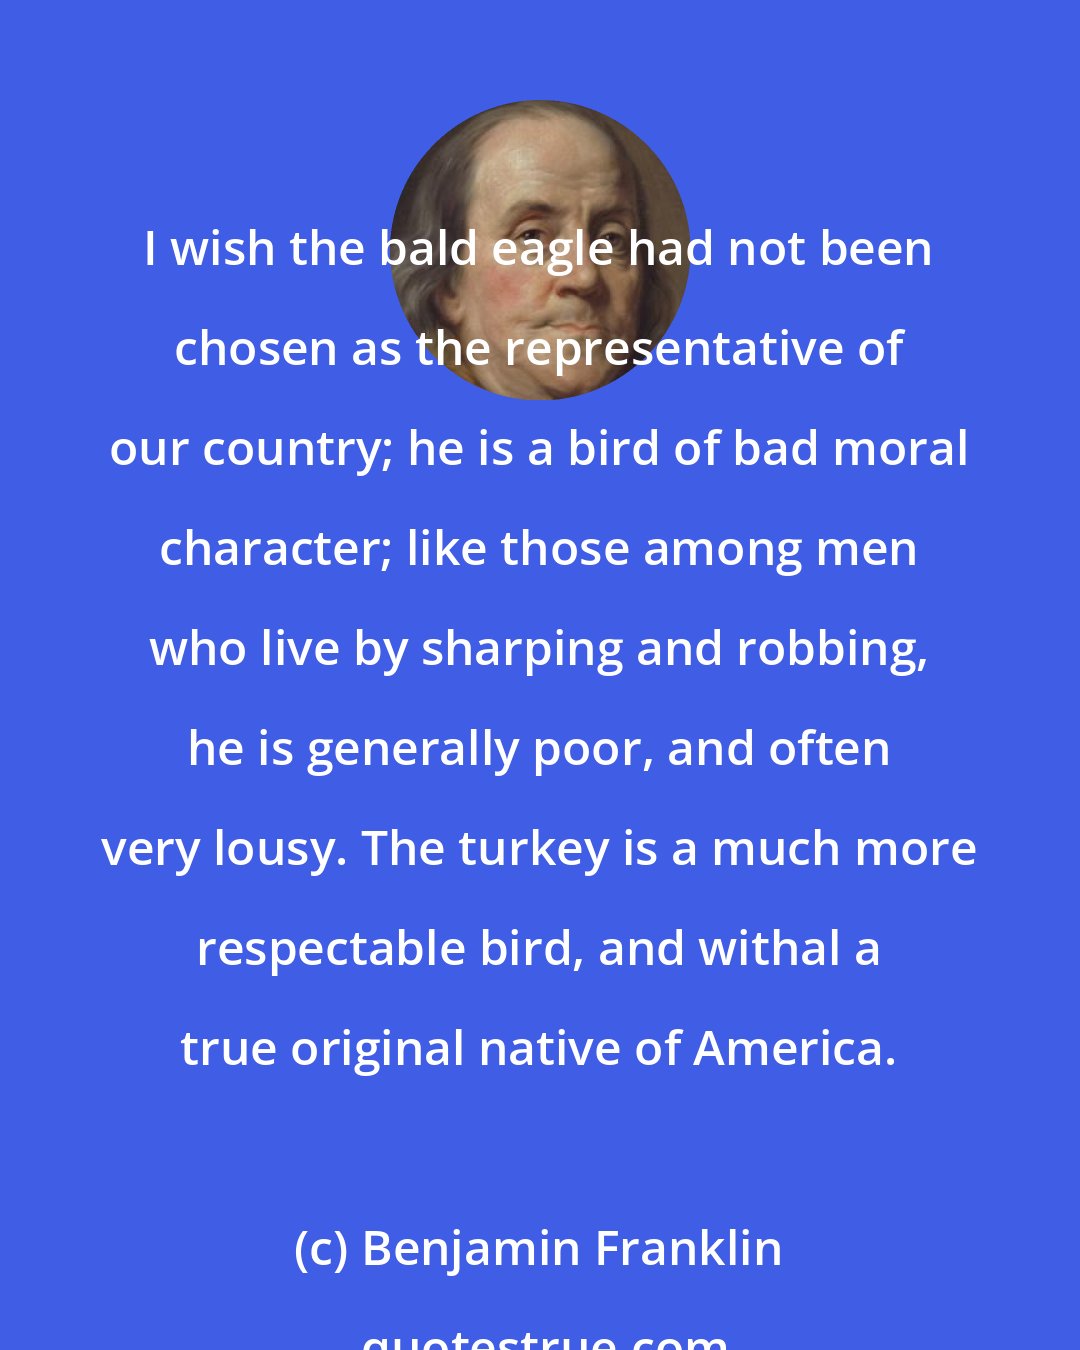 Benjamin Franklin: I wish the bald eagle had not been chosen as the representative of our country; he is a bird of bad moral character; like those among men who live by sharping and robbing, he is generally poor, and often very lousy. The turkey is a much more respectable bird, and withal a true original native of America.